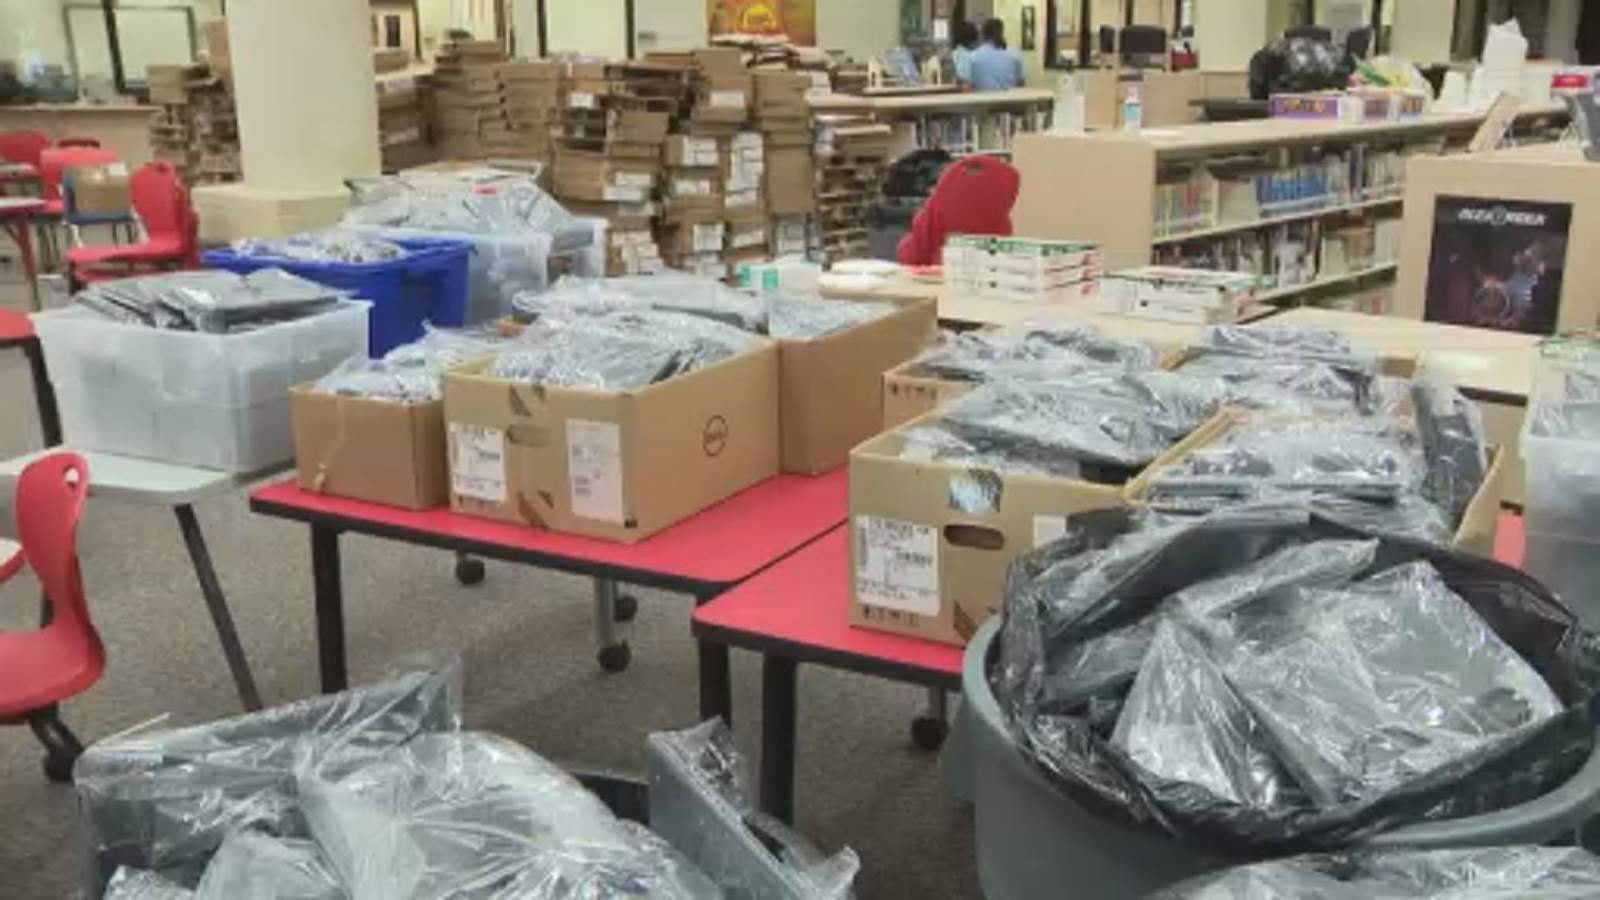 Houston-area school districts hand out devices, supplies to help families in need ahead of school year